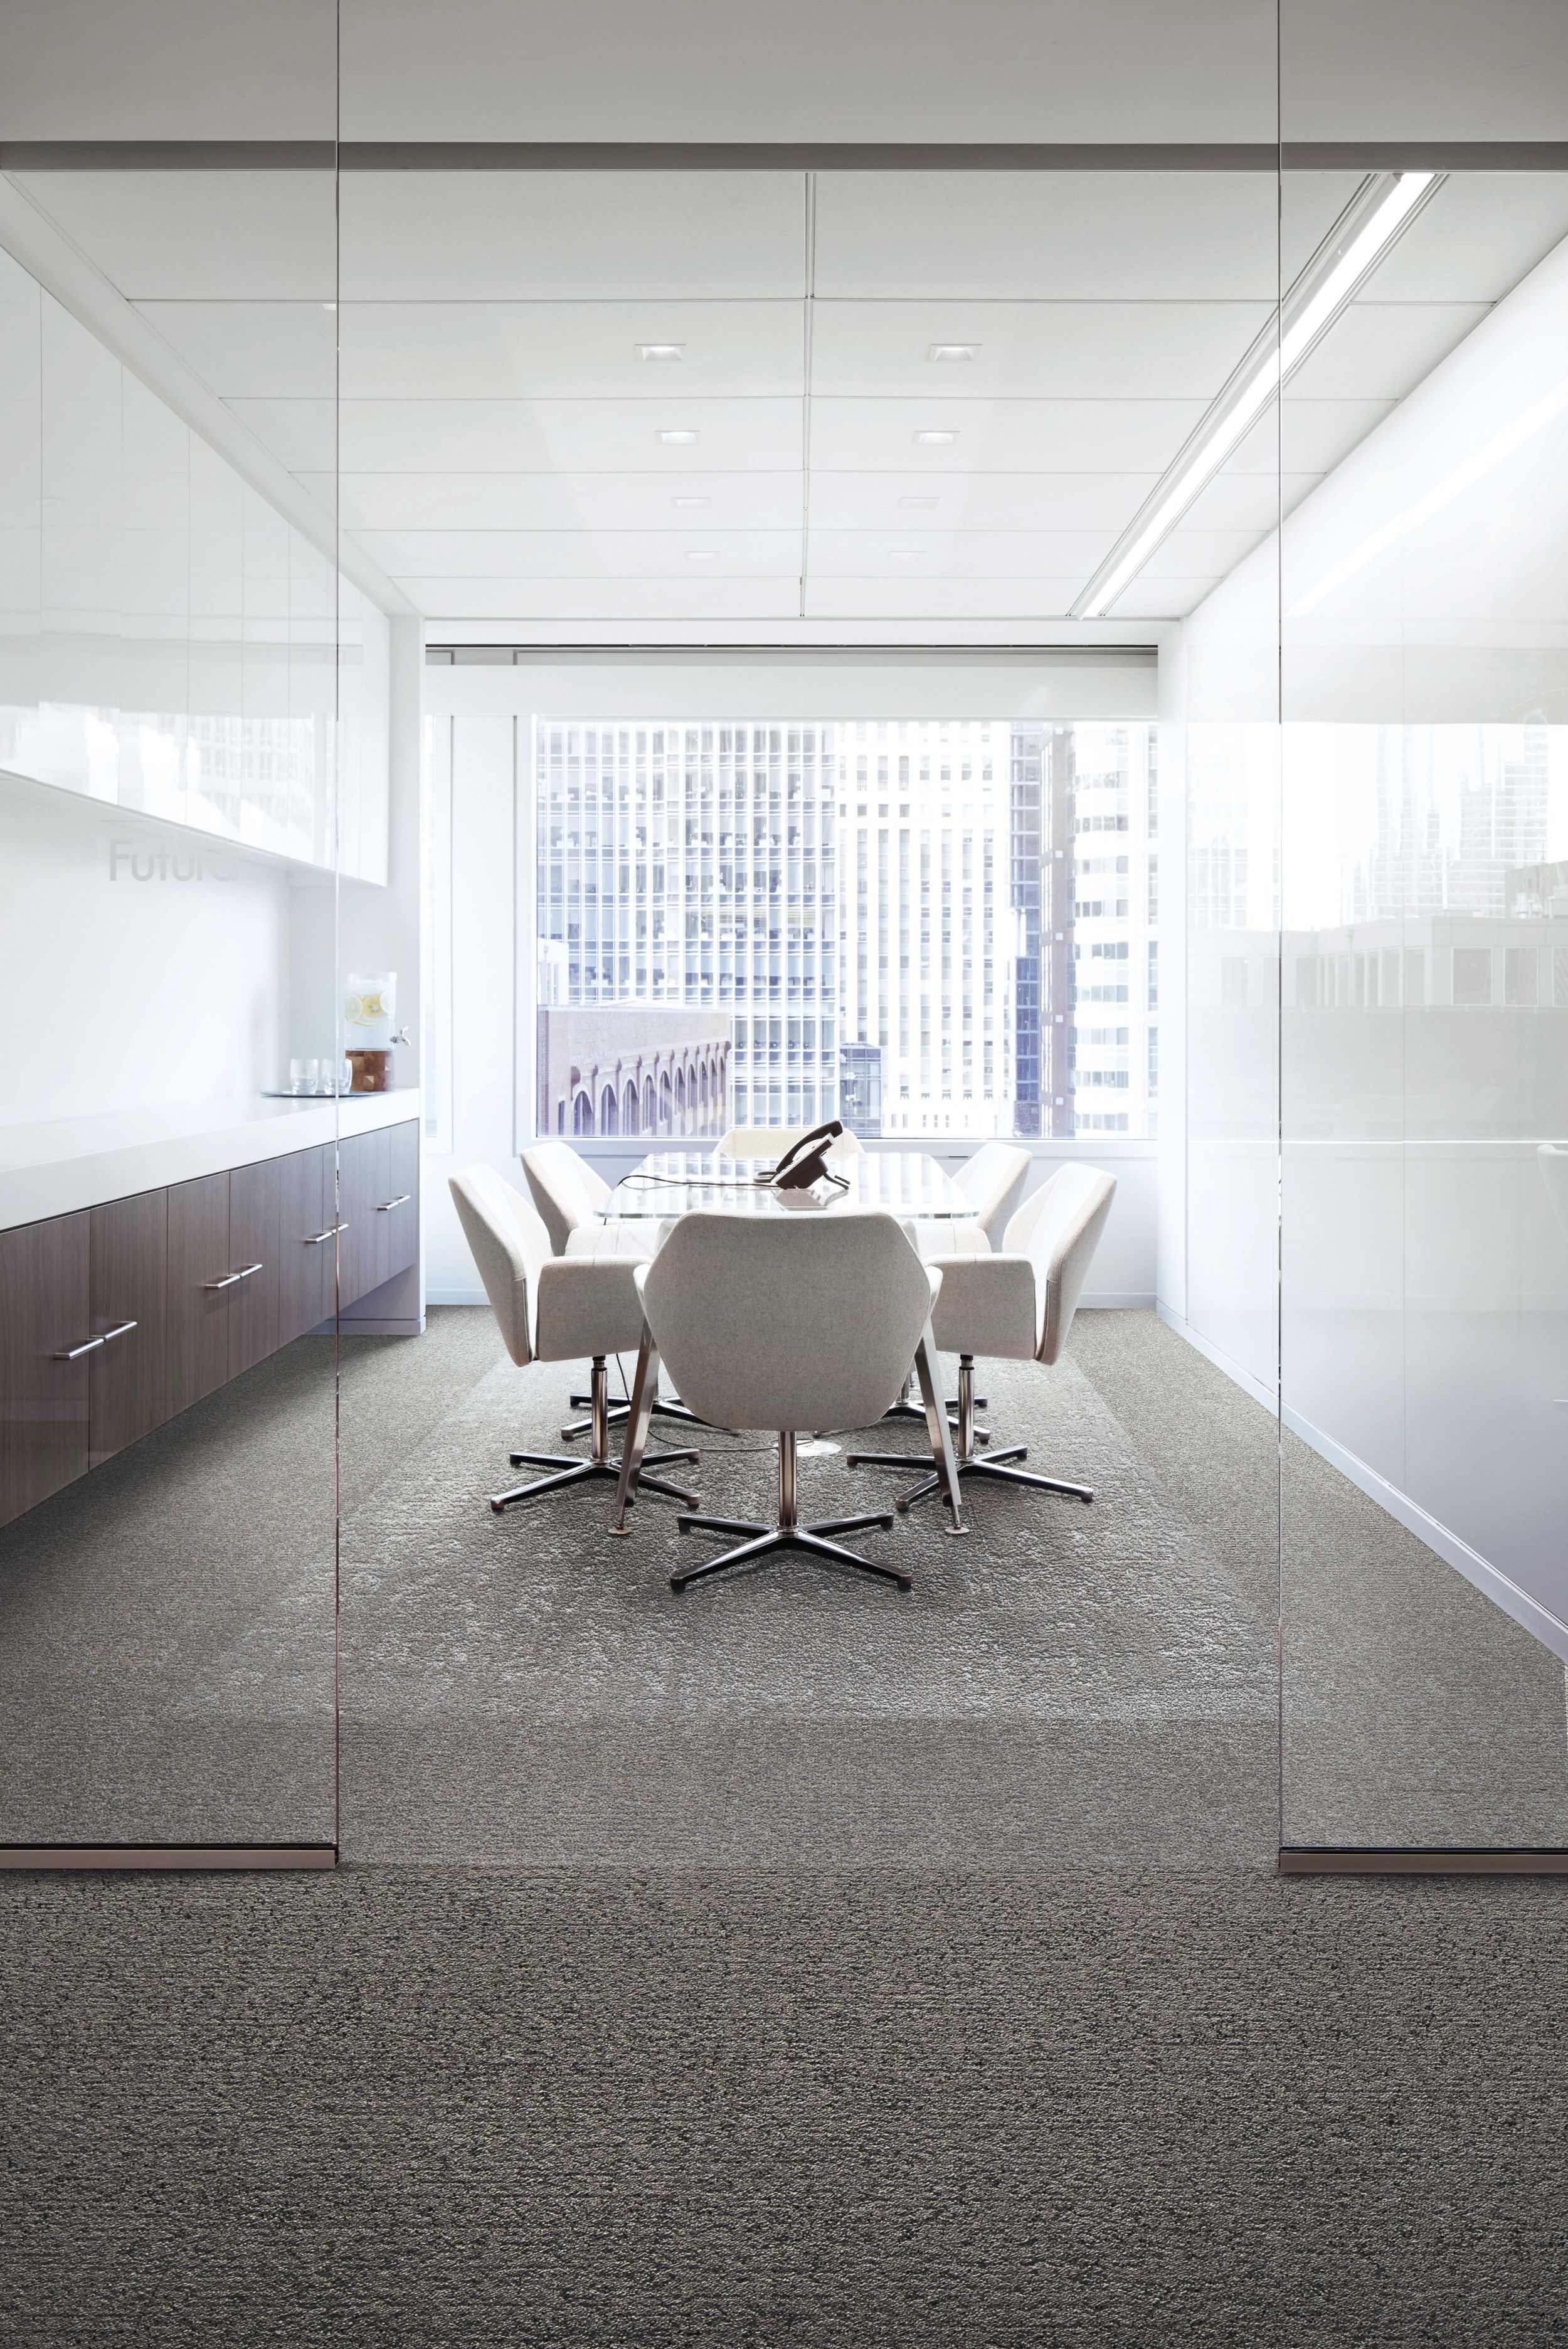 Interface Edge, Shed and Riverwalk carpet tiles in meeting room with glass door and office buildings in background window imagen número 4